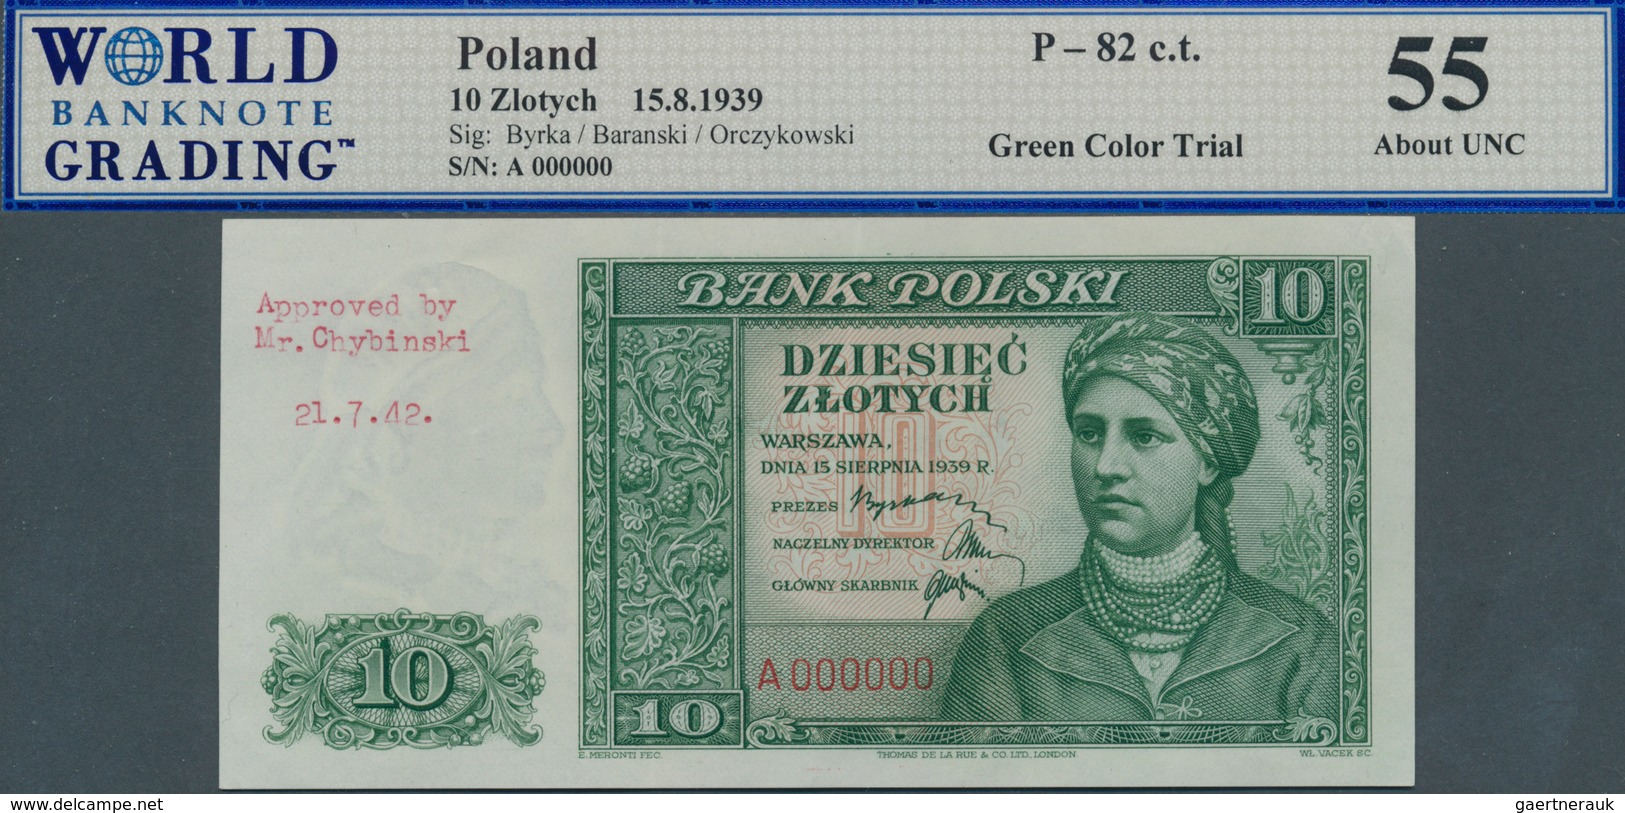 02206 Poland / Polen: 10 Zlotych 1939 Color Trial Specimen, P.82cts, WBG Graded 55 About UNC - Polonia